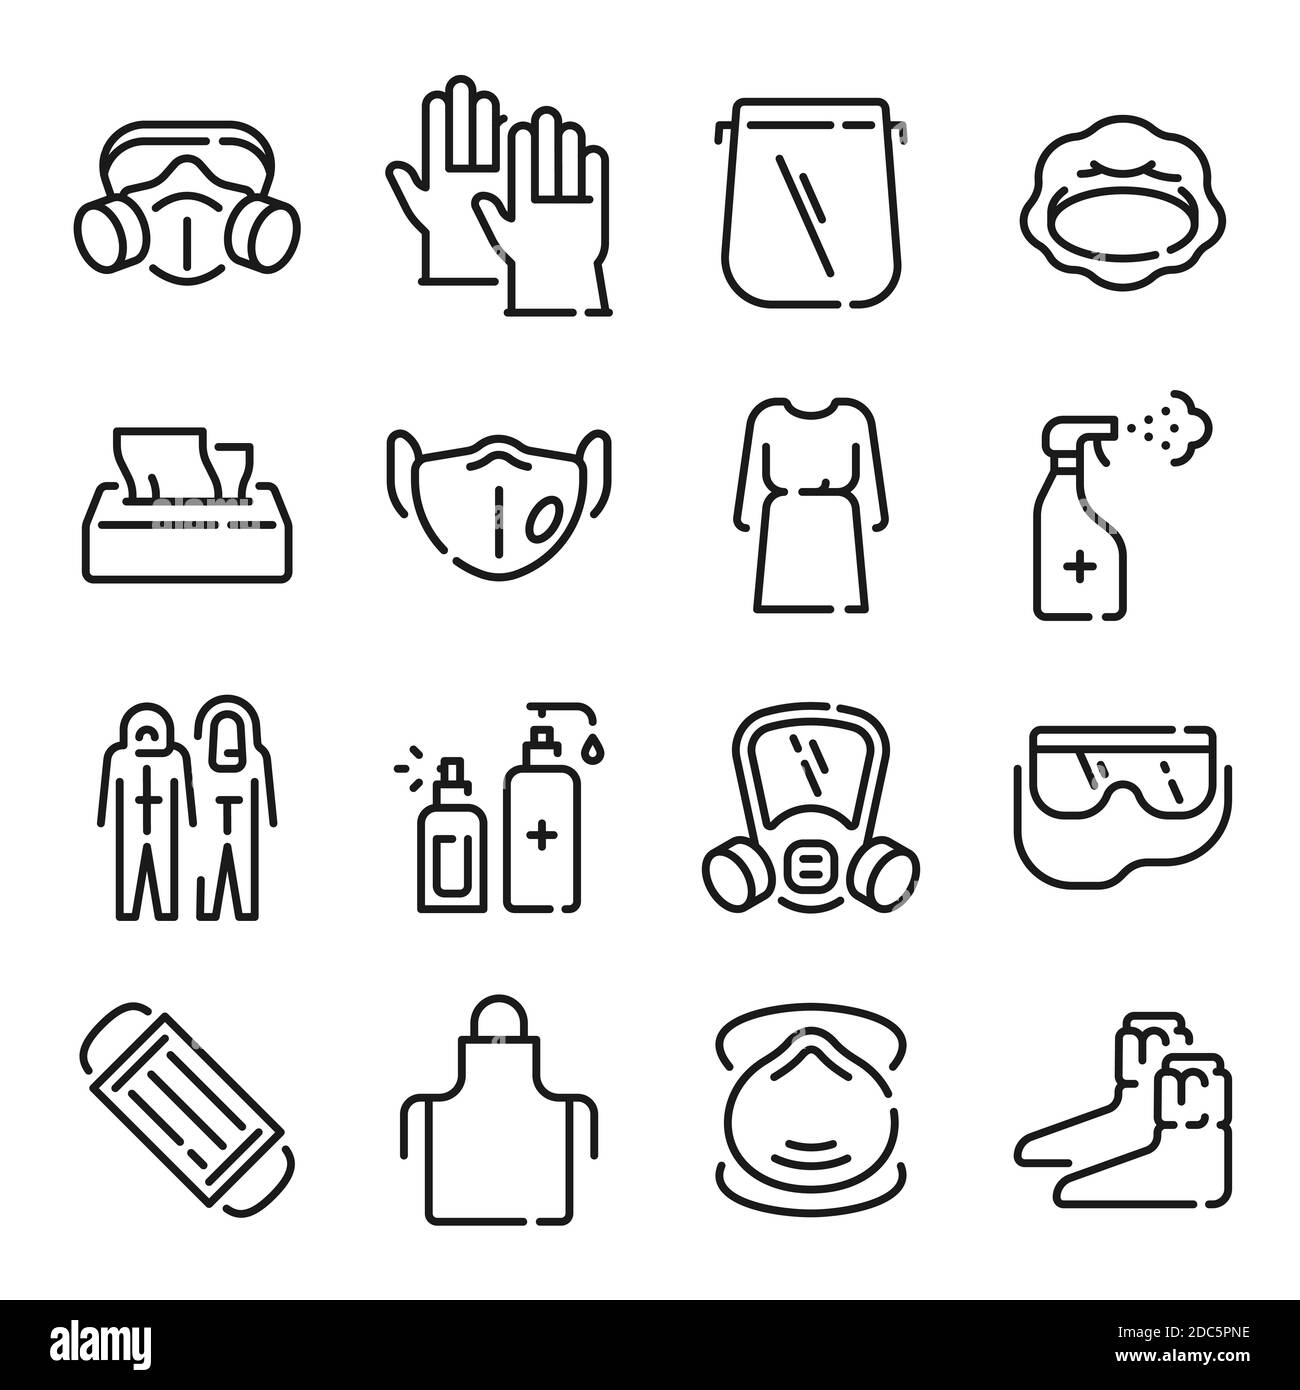 Ppe line icons. Medical covid-19 protection equipments. Outline doctor gown, face mask and shield, hair cover, apron and goggles. Vector set Stock Vector